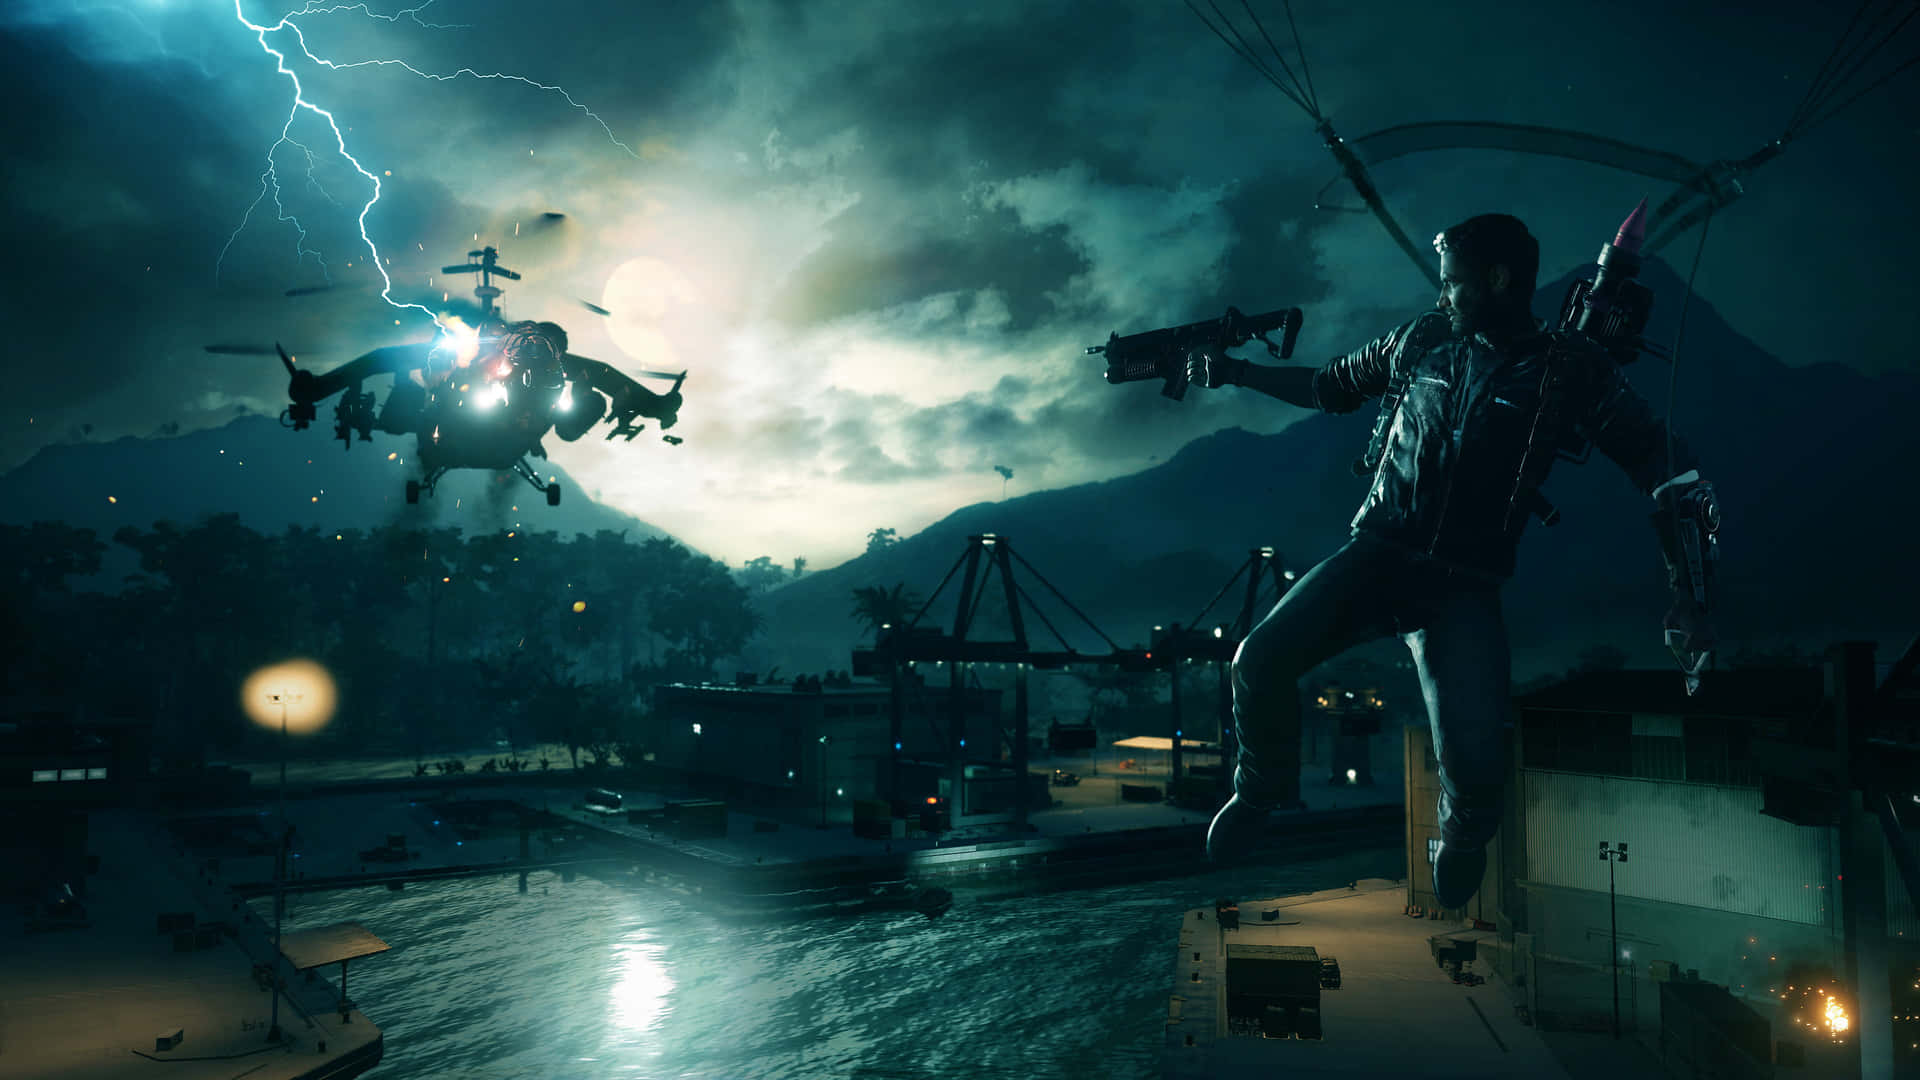 Best Just Cause 4 Background Rico Shooting A Helicopter